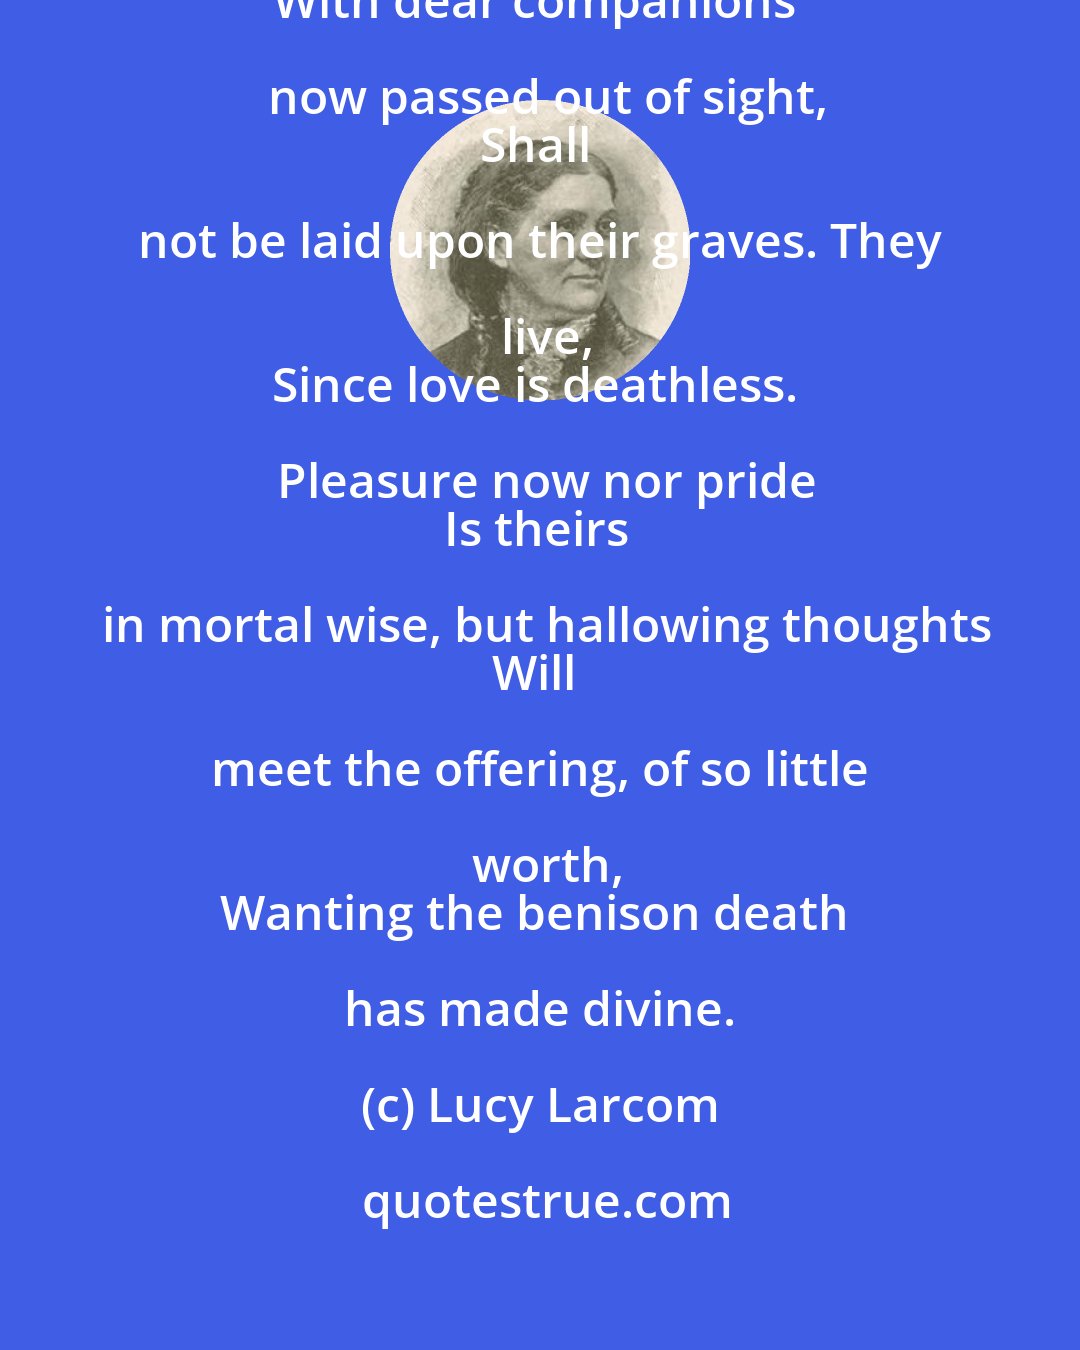 Lucy Larcom: These blossoms, gathered in familiar paths,
With dear companions now passed out of sight,
Shall not be laid upon their graves. They live,
Since love is deathless. Pleasure now nor pride
Is theirs in mortal wise, but hallowing thoughts
Will meet the offering, of so little worth,
Wanting the benison death has made divine.